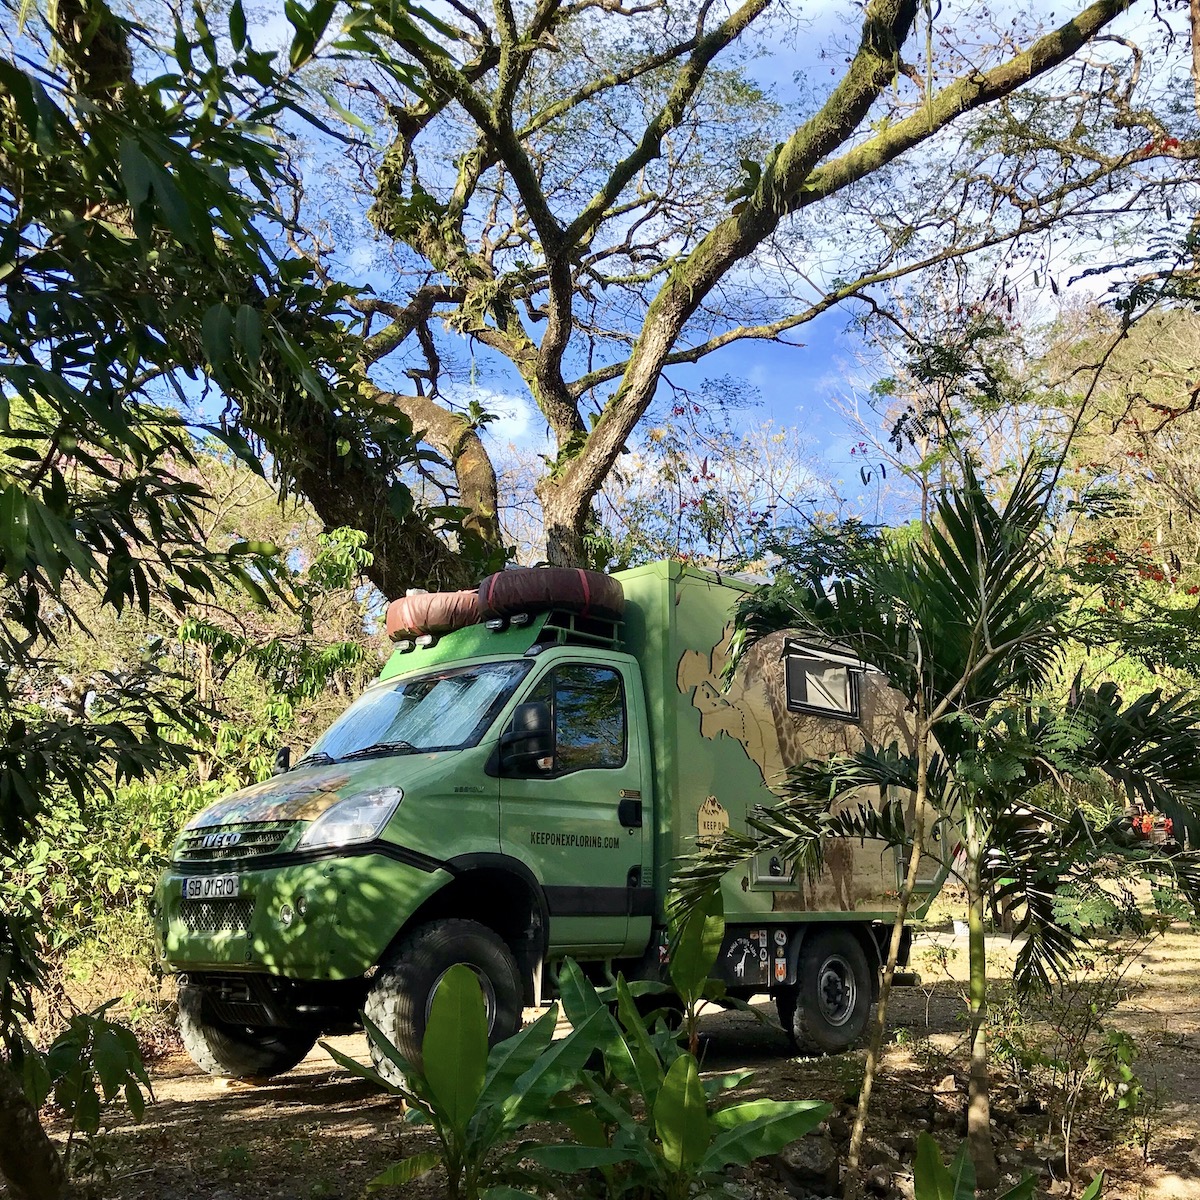 Brutus at Finca Canas Castilla, 20km from the border with Nicaragua.